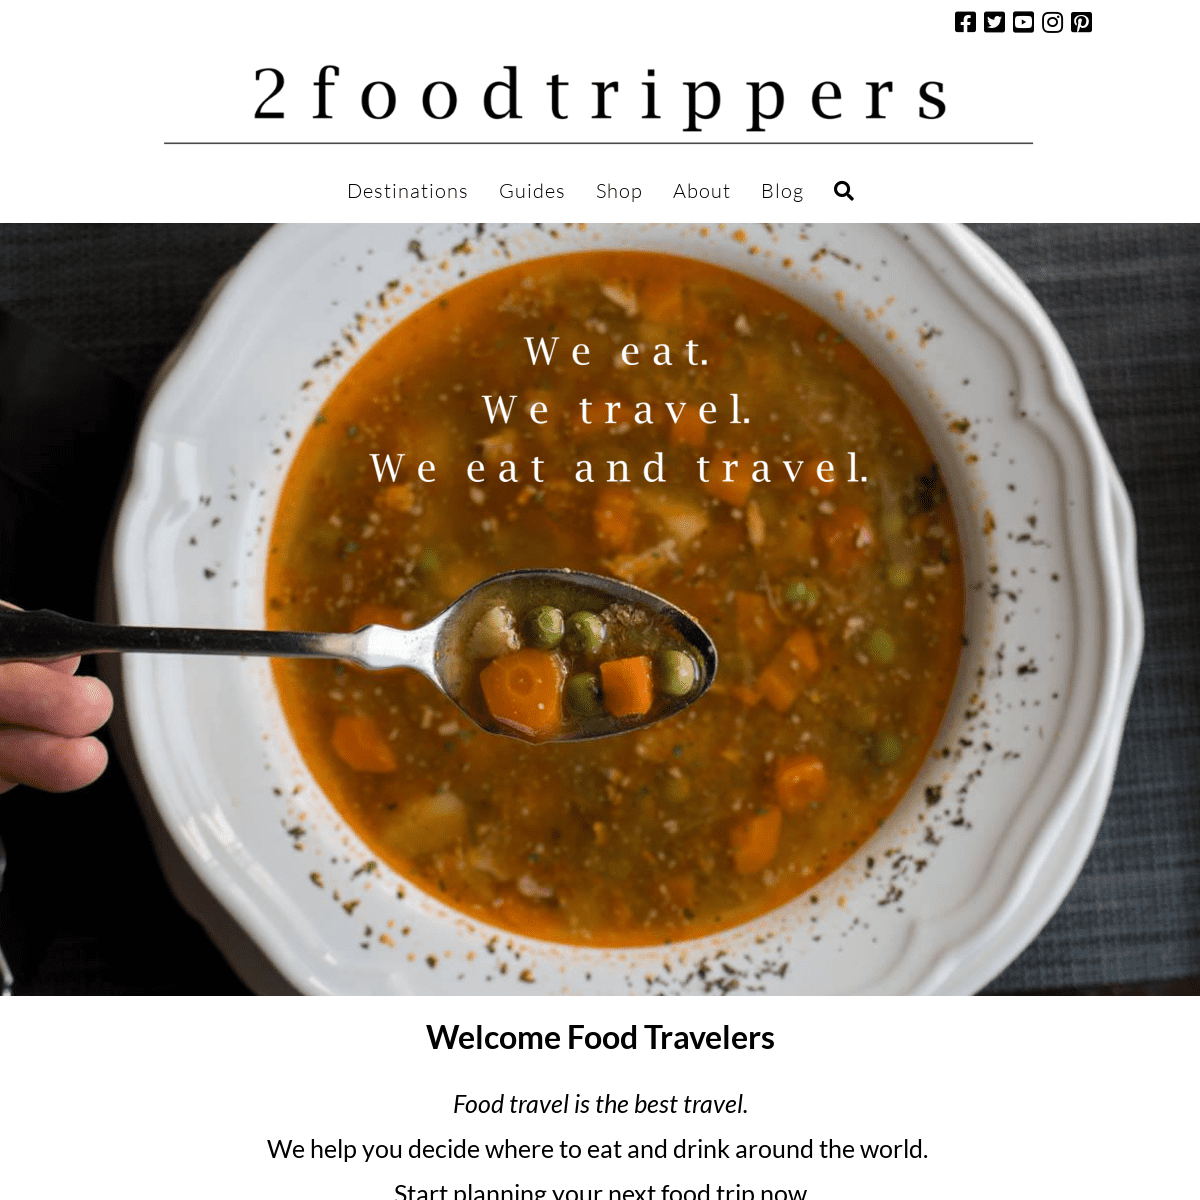 A complete backup of 2foodtrippers.com